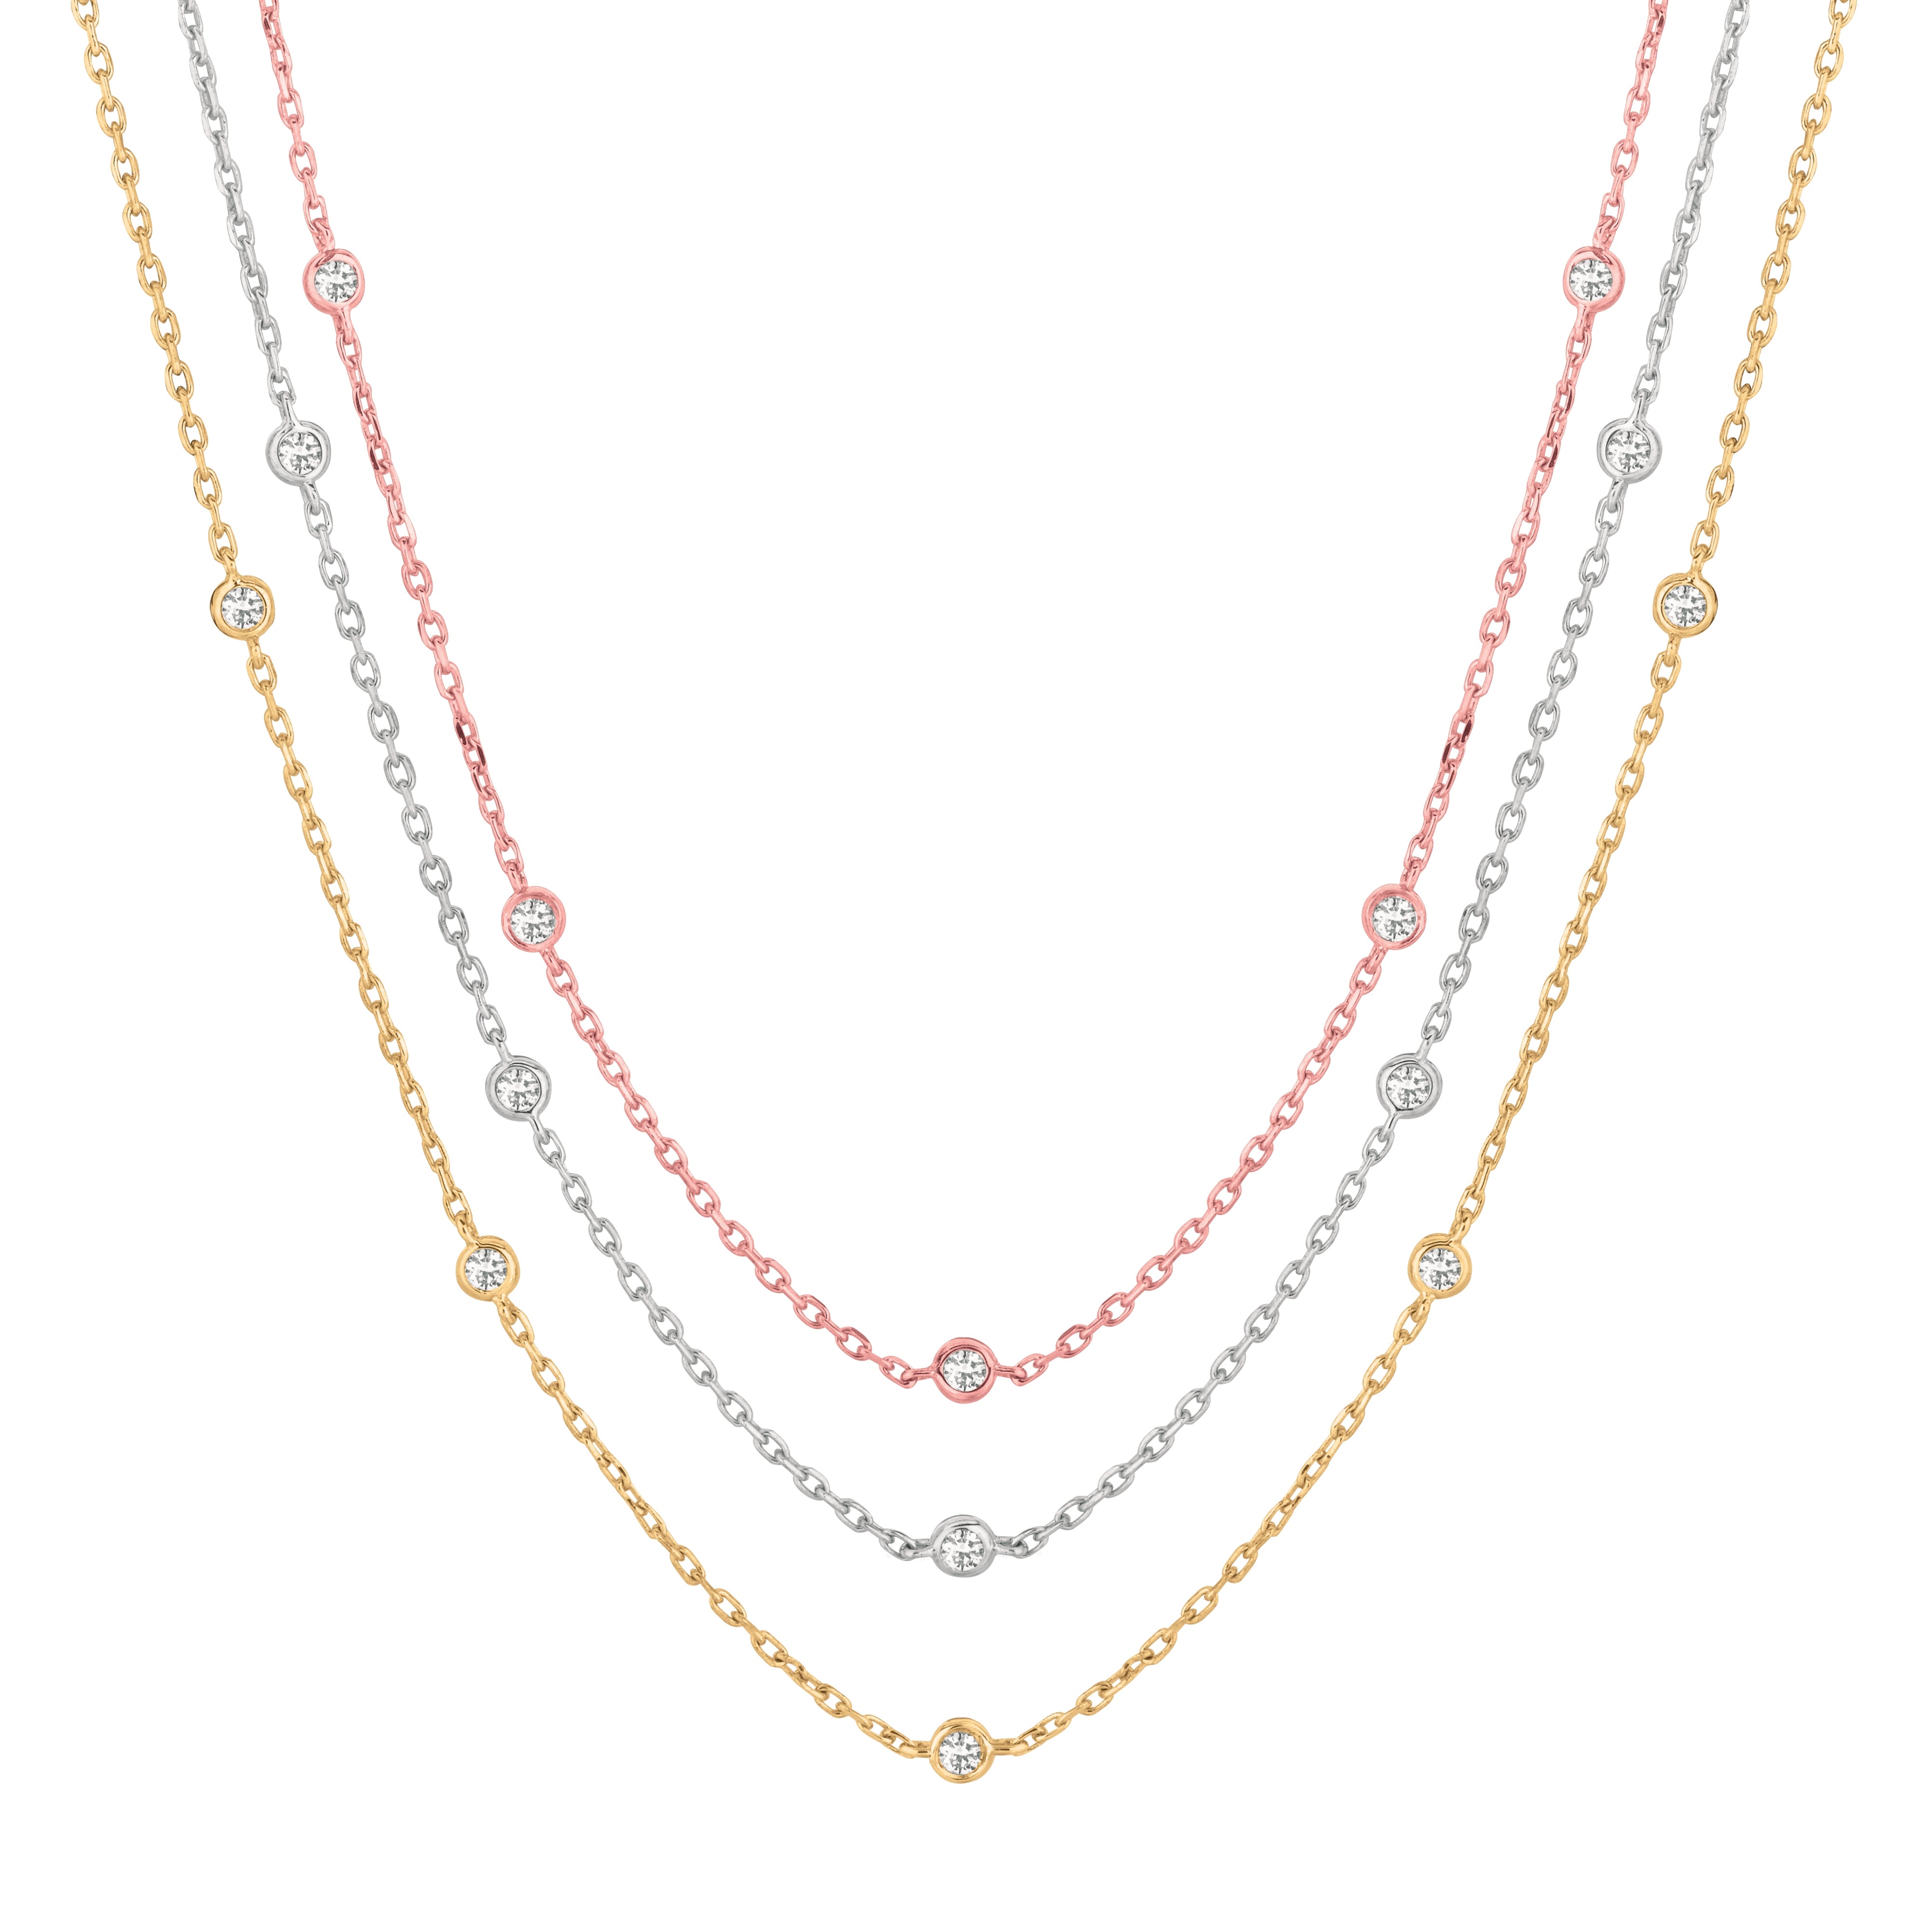 3.60CTW BR DIA BY YARD NECKLACE 14KYG 36